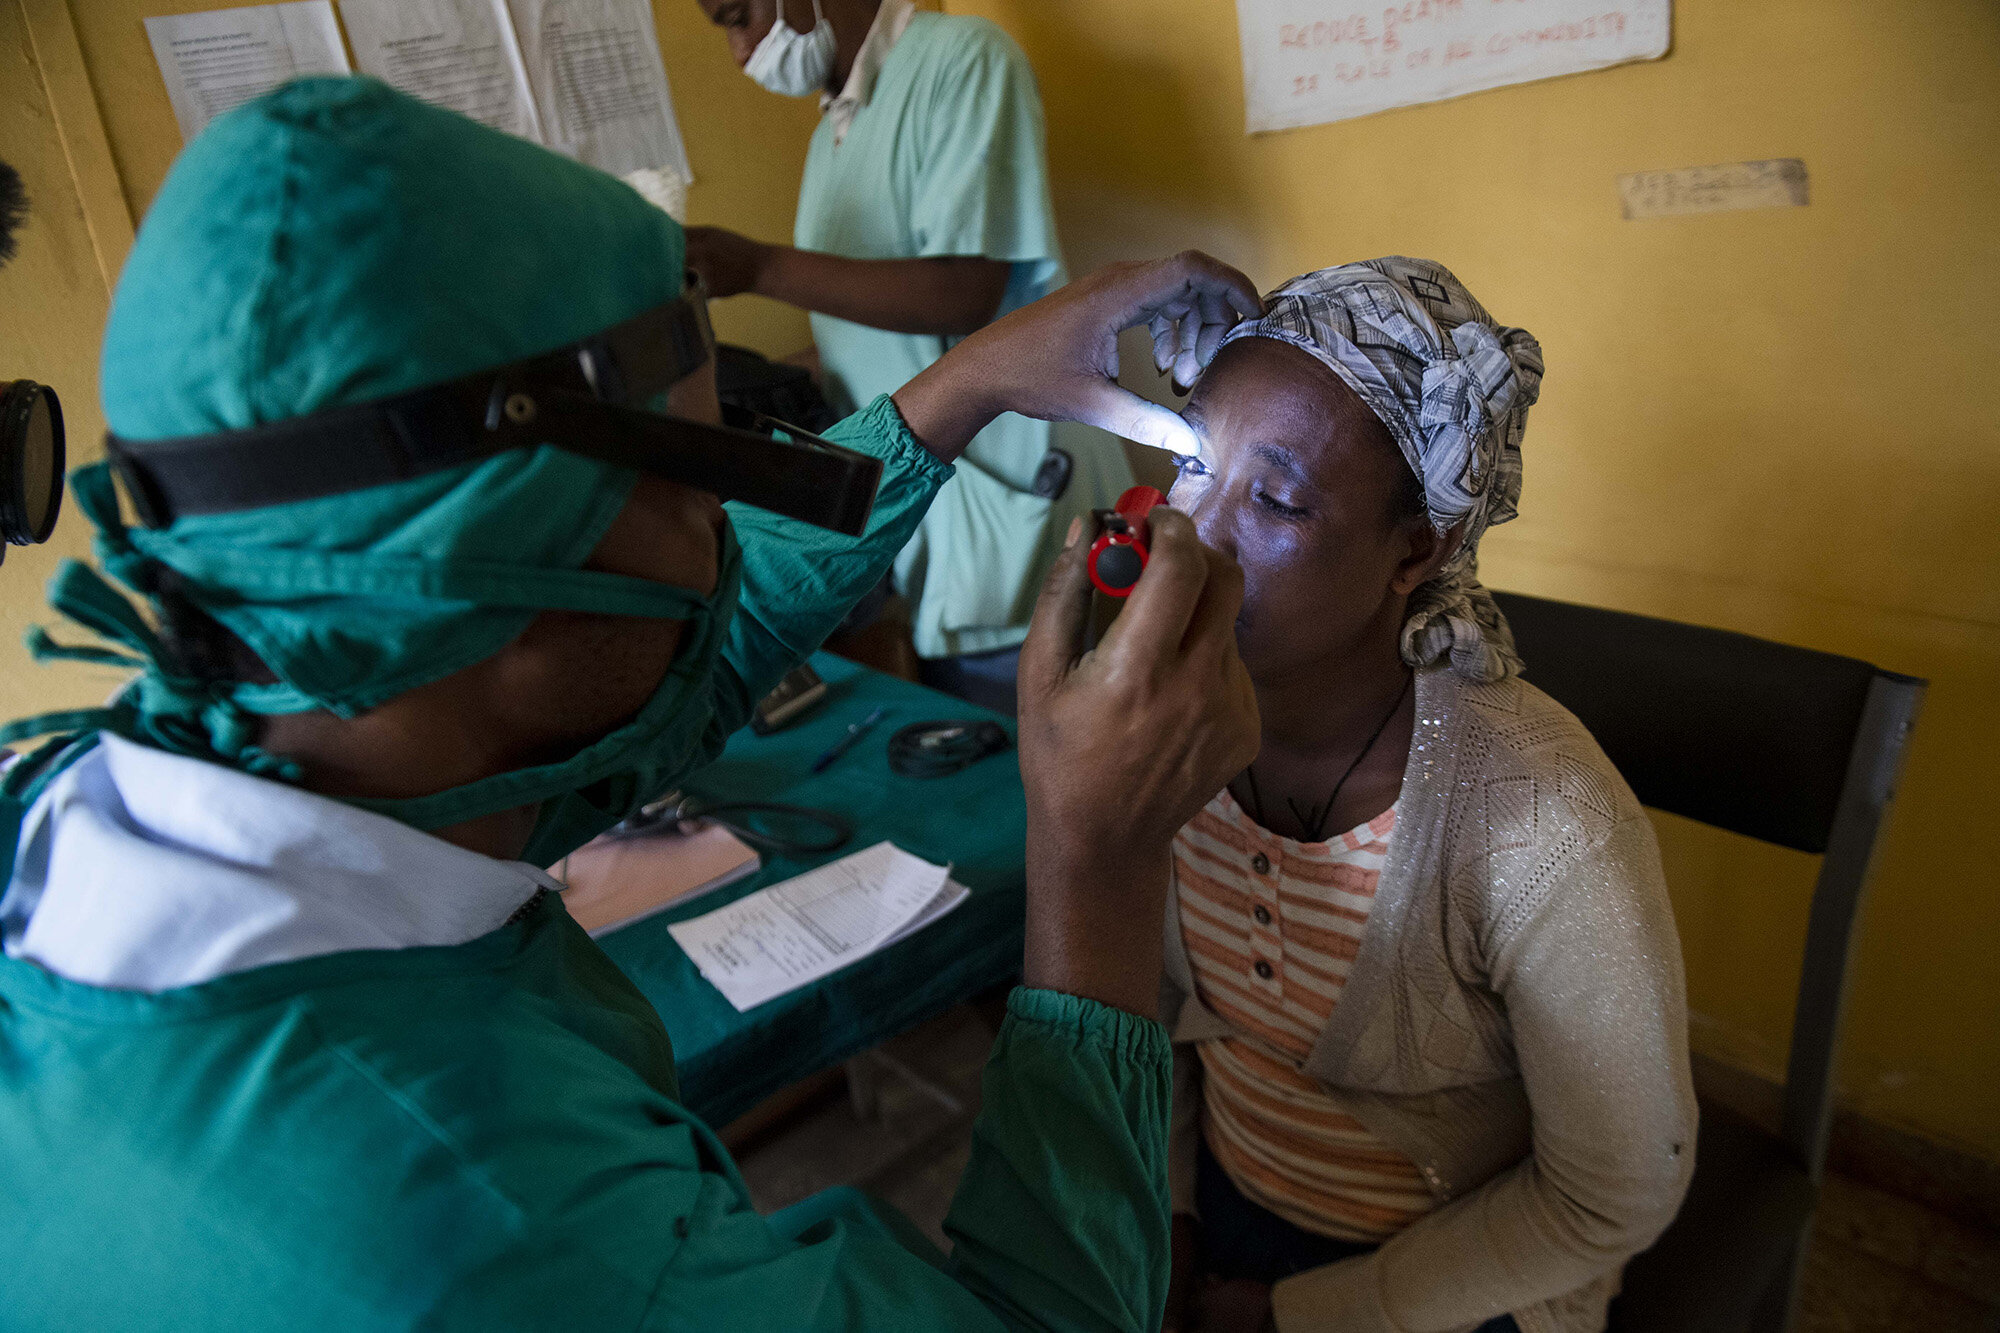  A doctor checks Asnaku Tufa’s eyes for Trachomatous Trichiasis (TT) during a free screening at the Dire Primary Health Care Unit. She tested positive for the disease. 